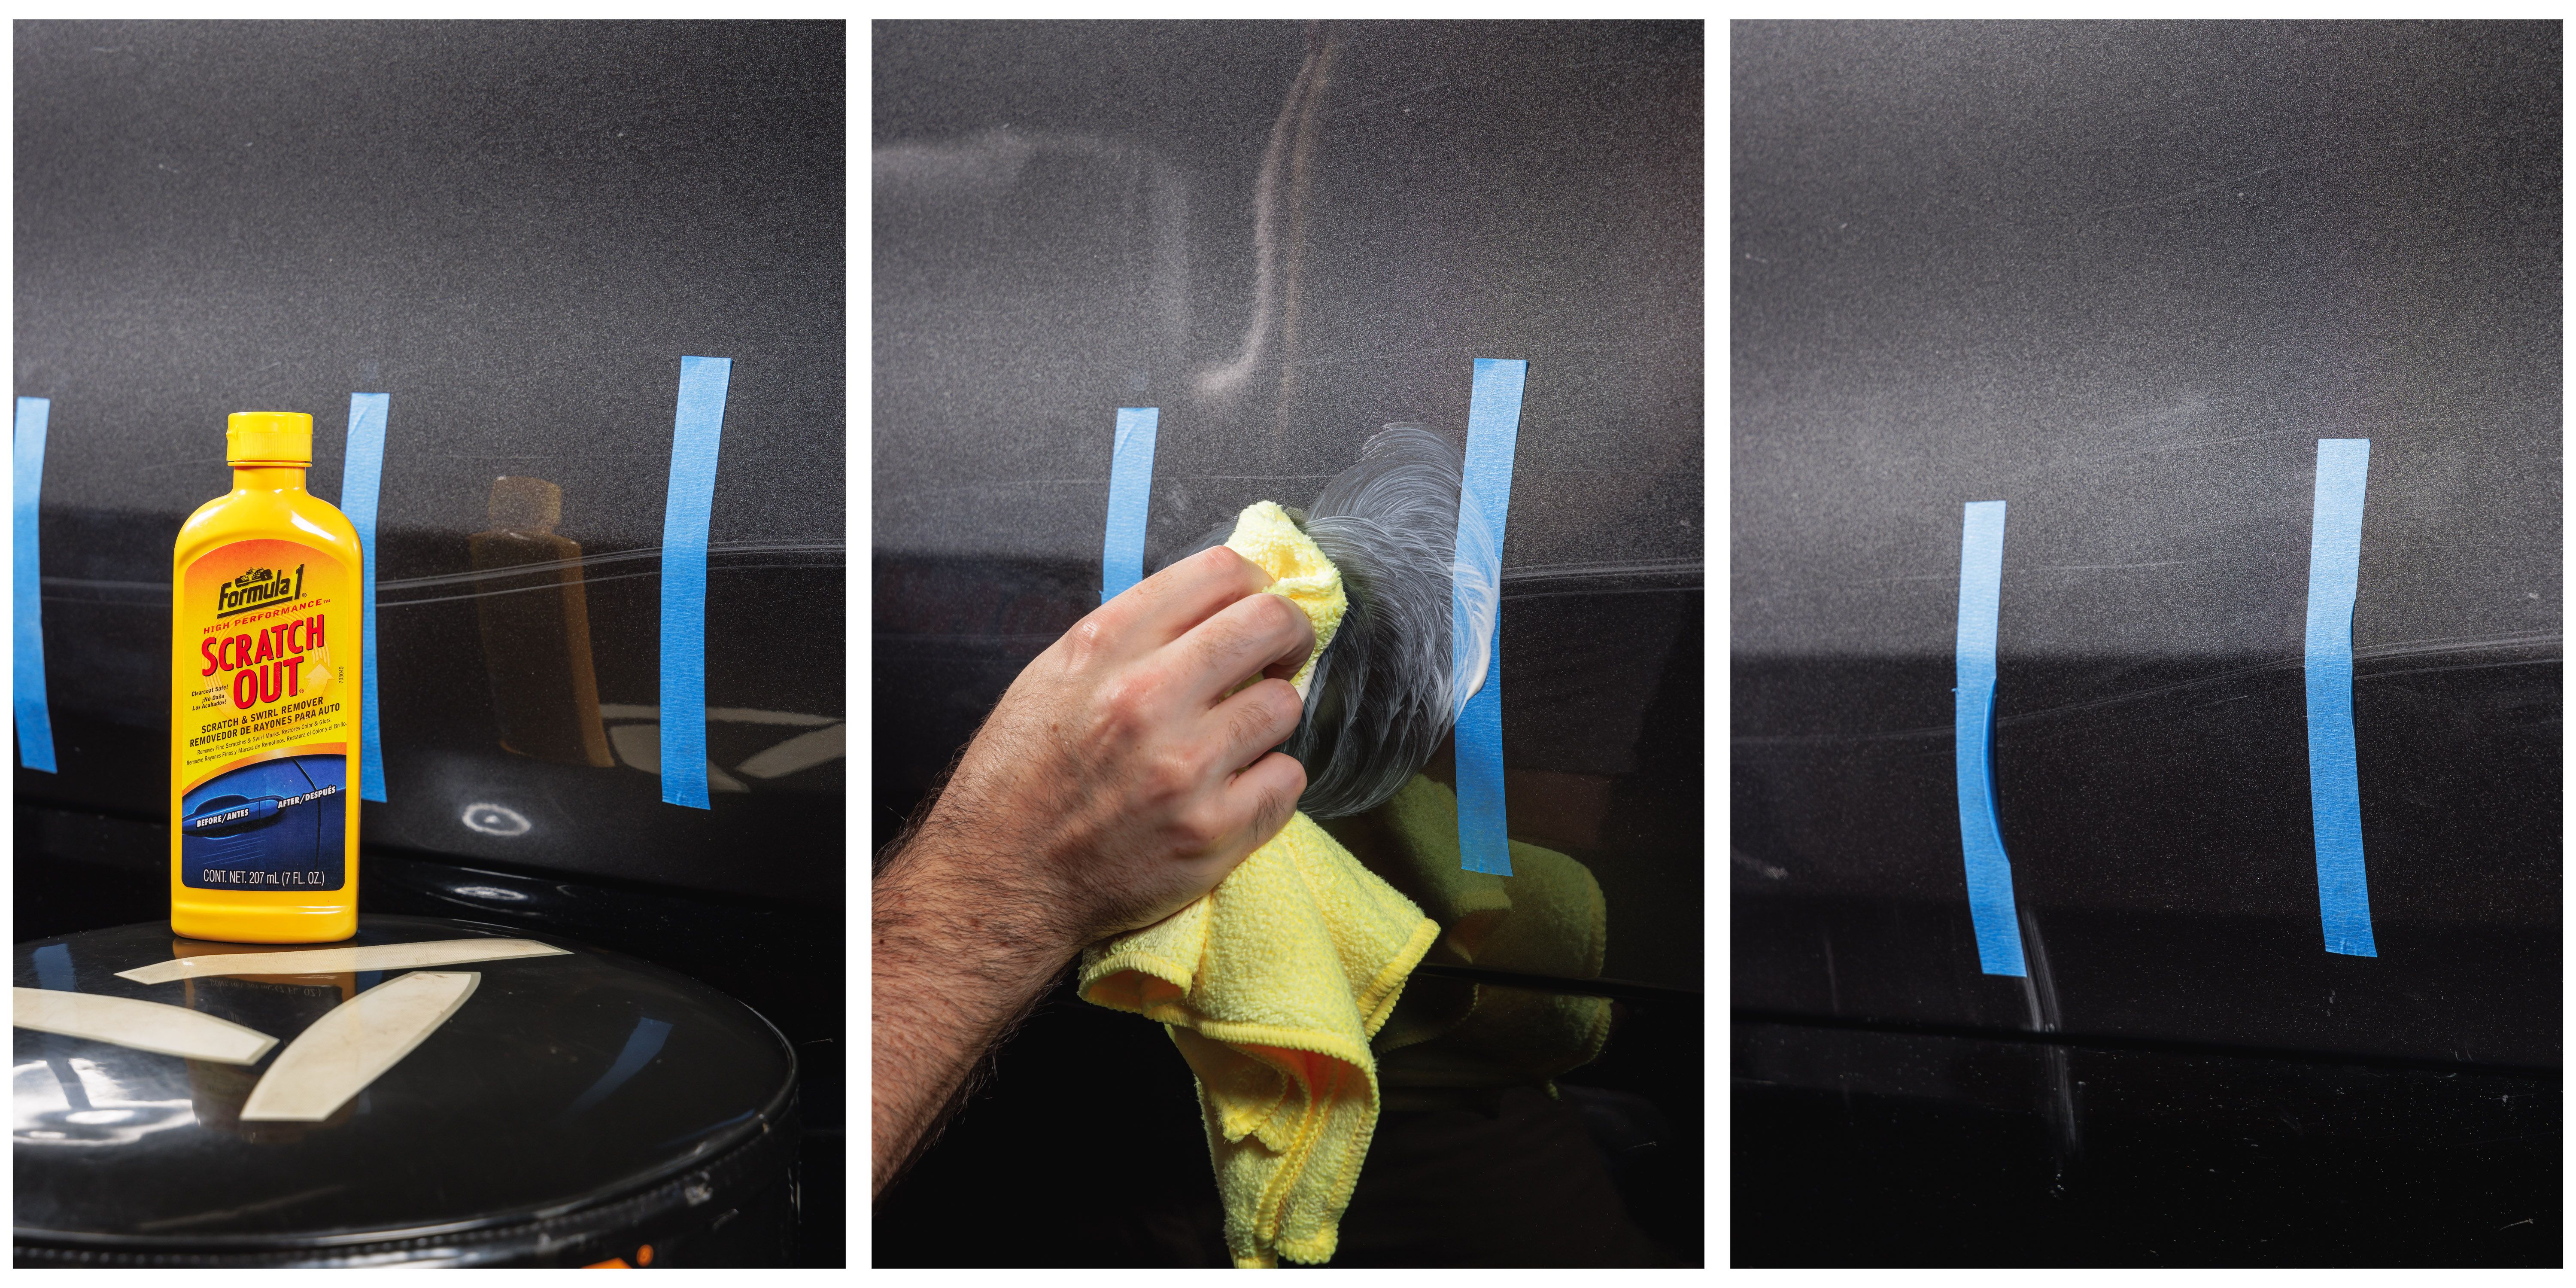 Car Scratch Removal Wax Instantly Erase Car Scratches Car Plastic